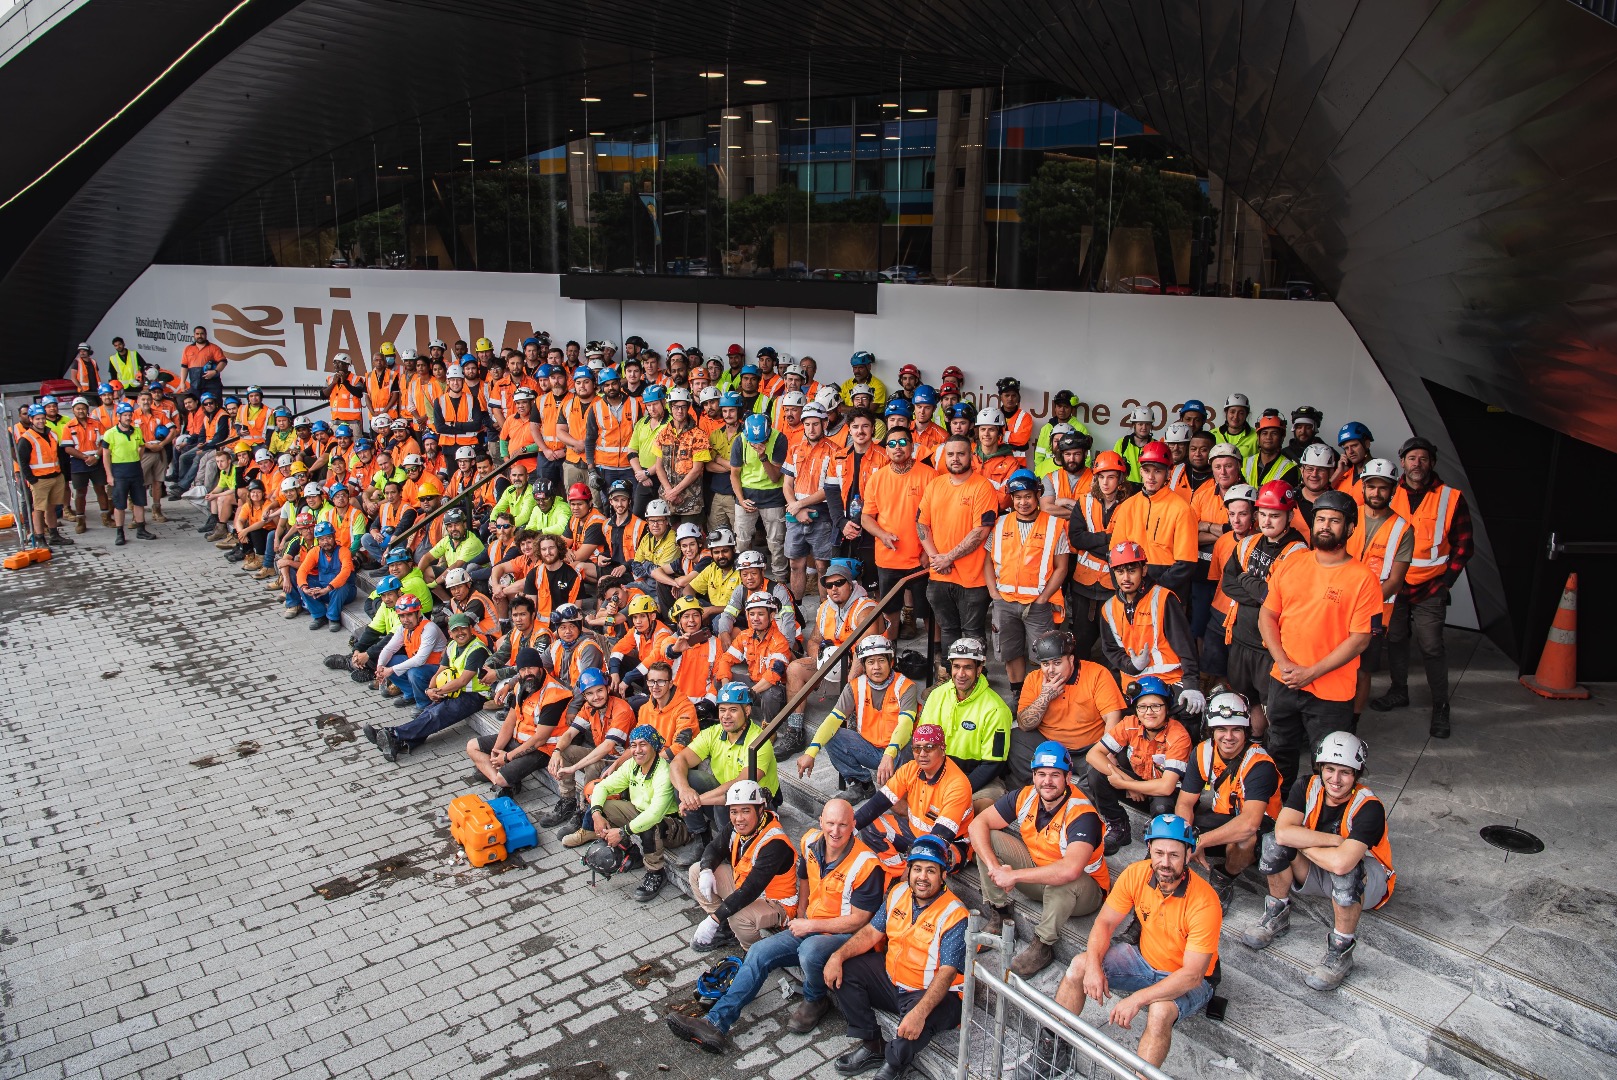 Members of the site team gather at the main entrance of Tākina during construction.